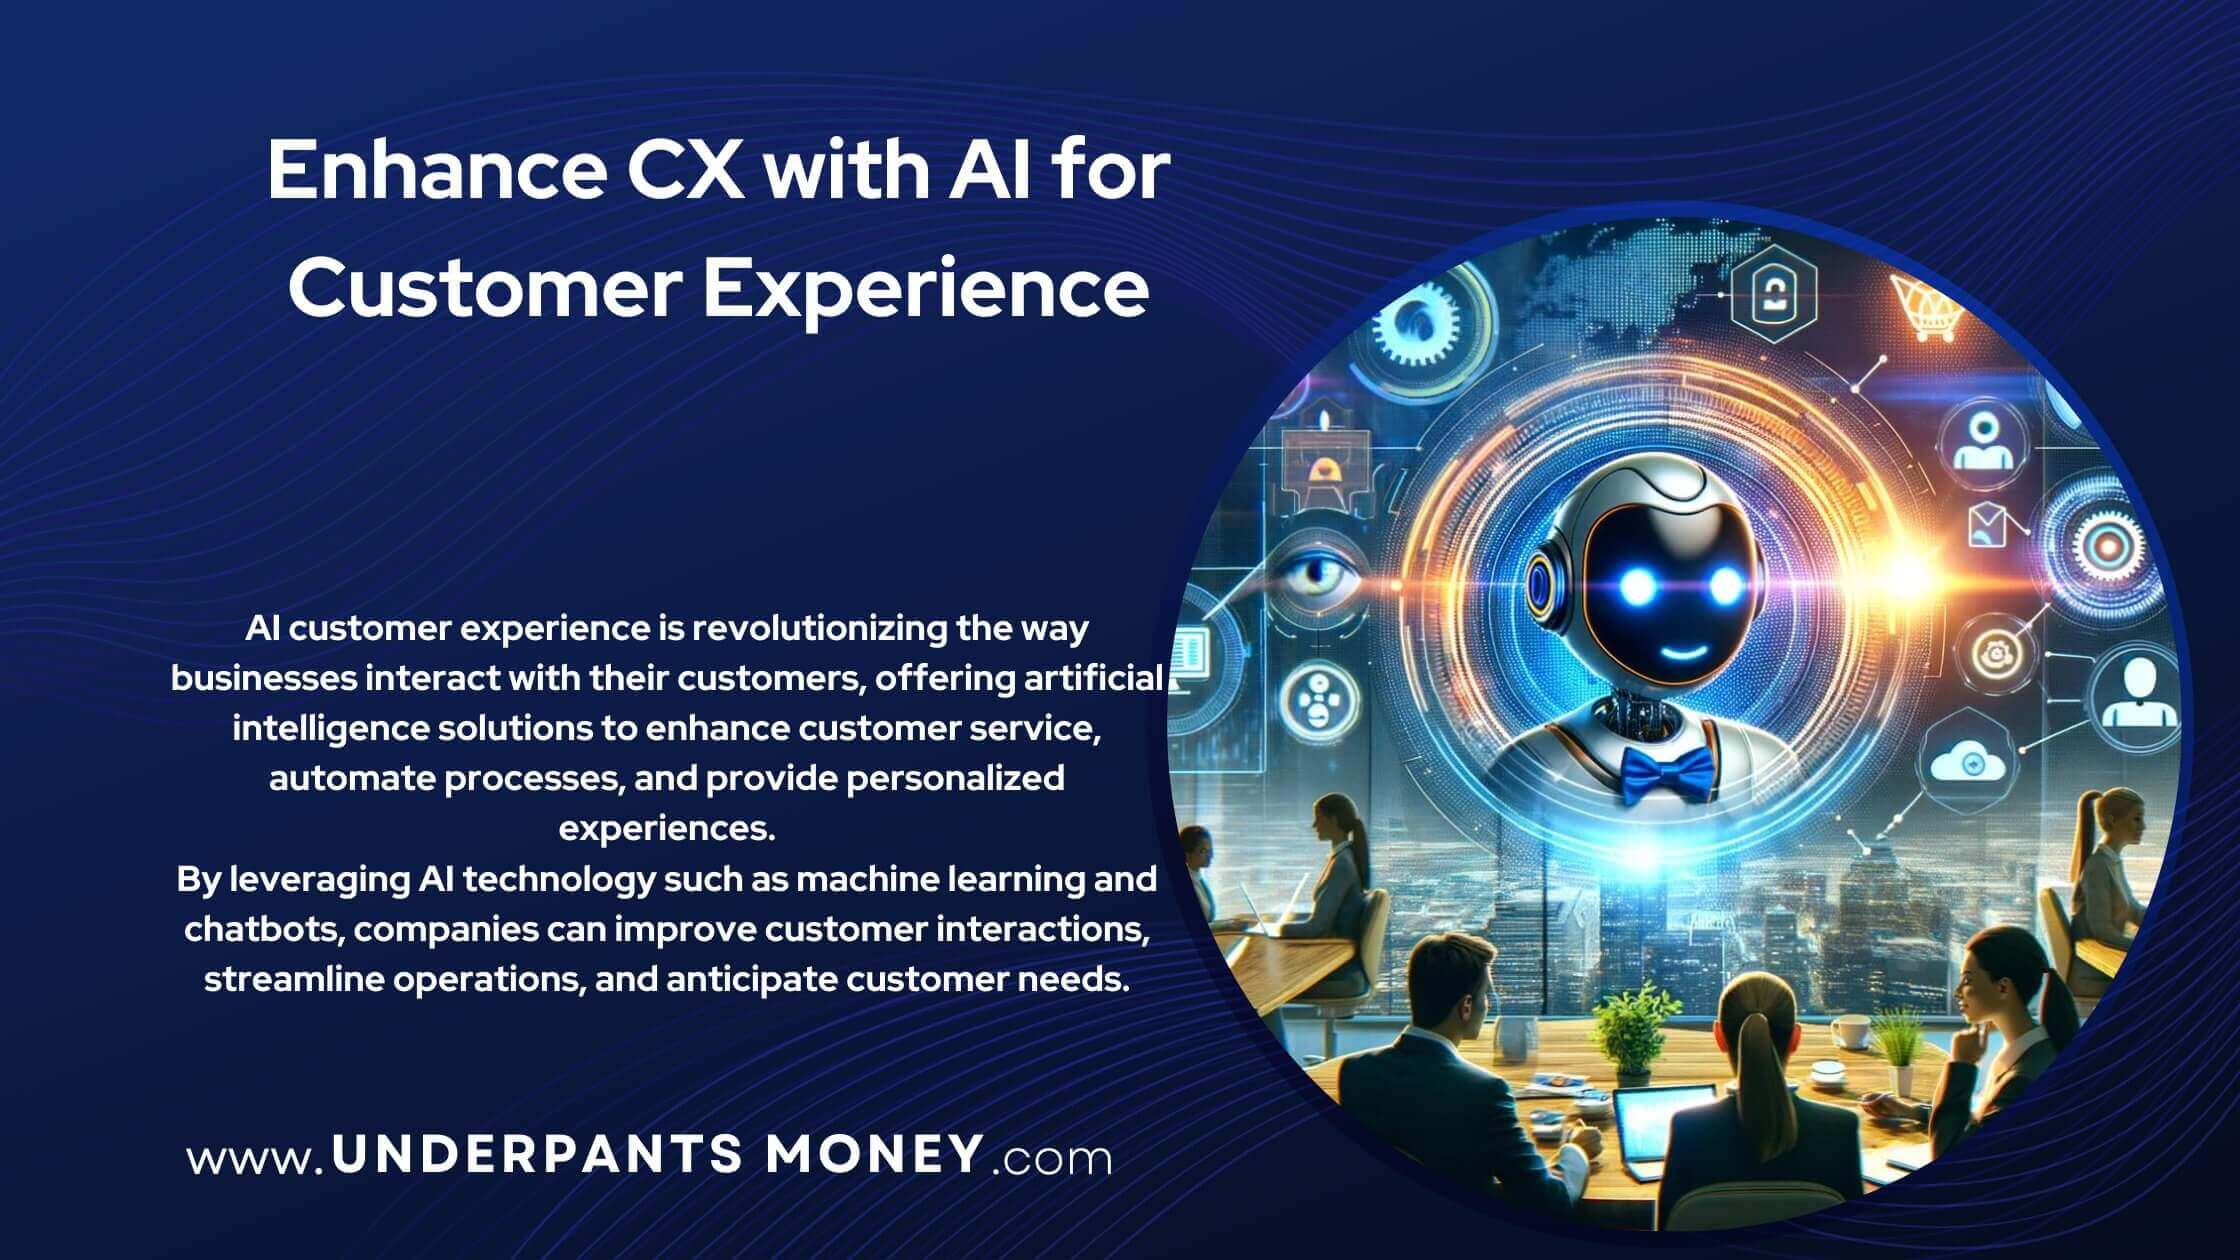 Enhance CX with AI for customer experience title on blue with description and robot working in an office to the right